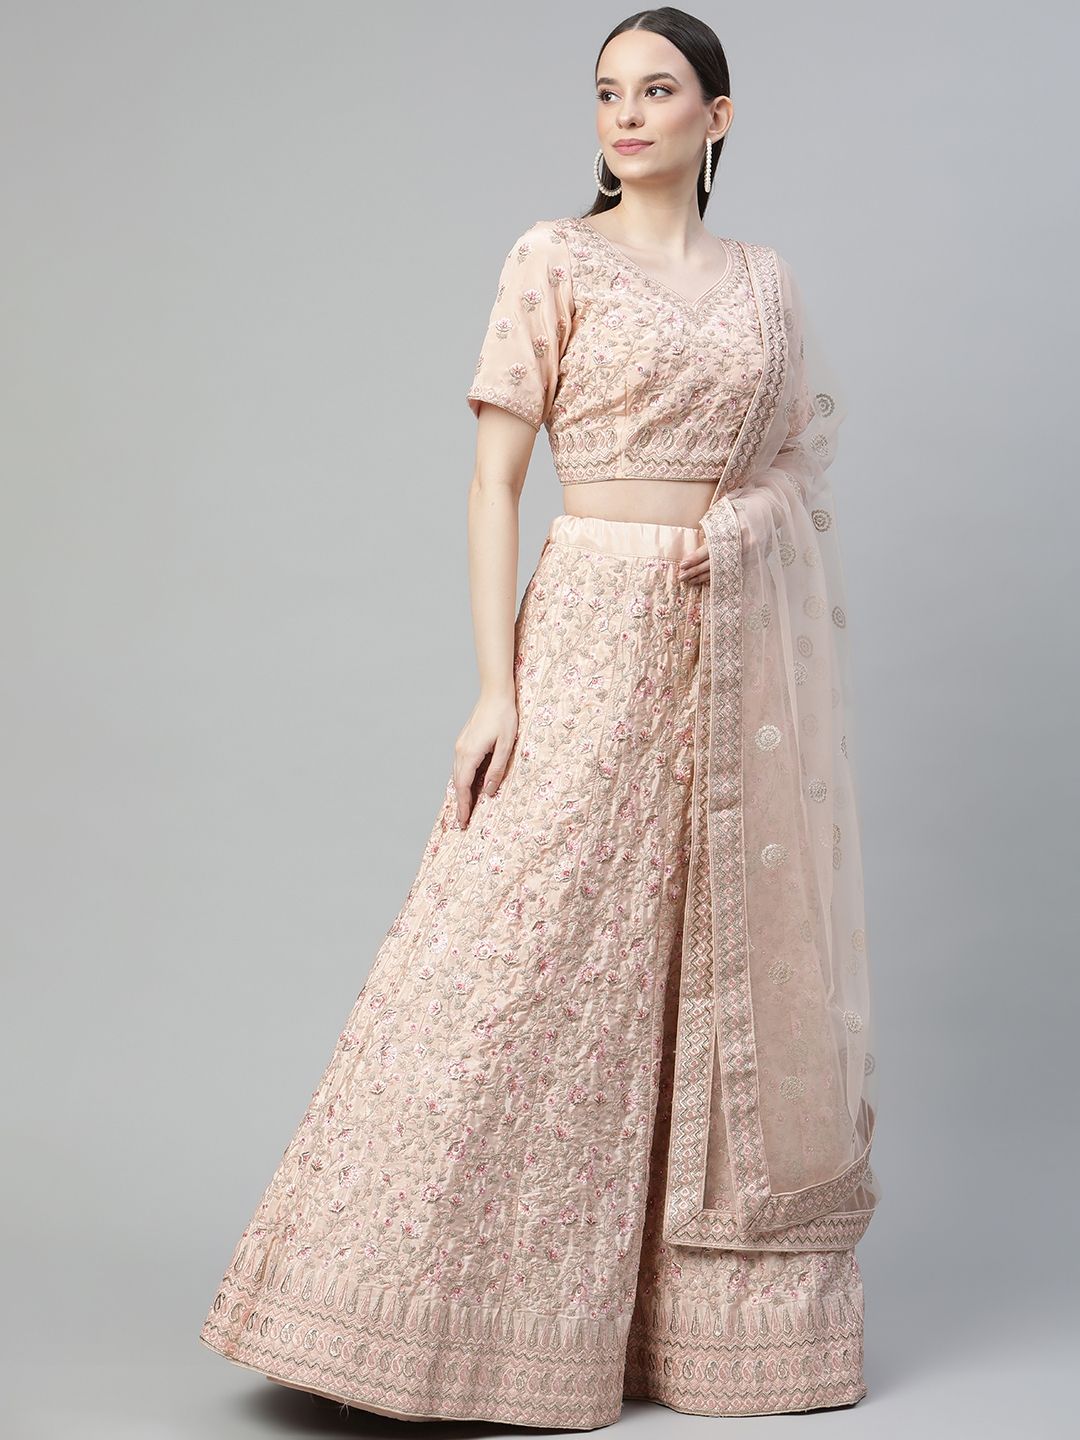 Readiprint Fashions Peach-Coloured Embroidered Semi-Stitched Lehenga & Unstitched Blouse With Dupatta Price in India